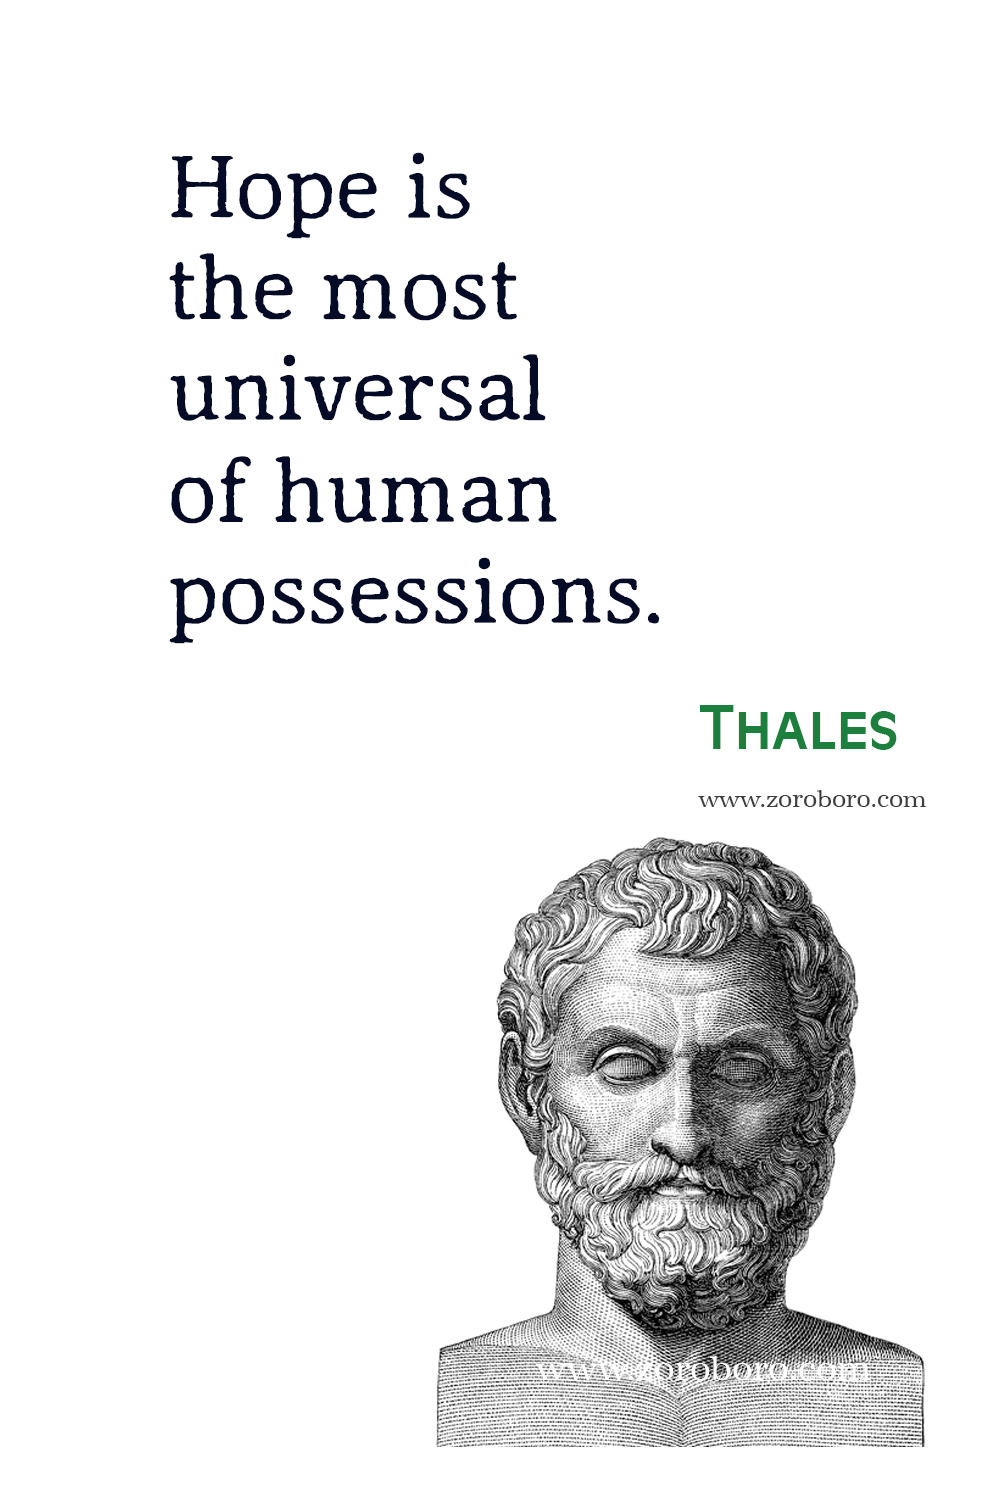 Thales Quotes, Thales Philosophy, Thales Books Quotes, Thales Image, Thales Science / Thales Theory Quotes. Thales of Miletus.